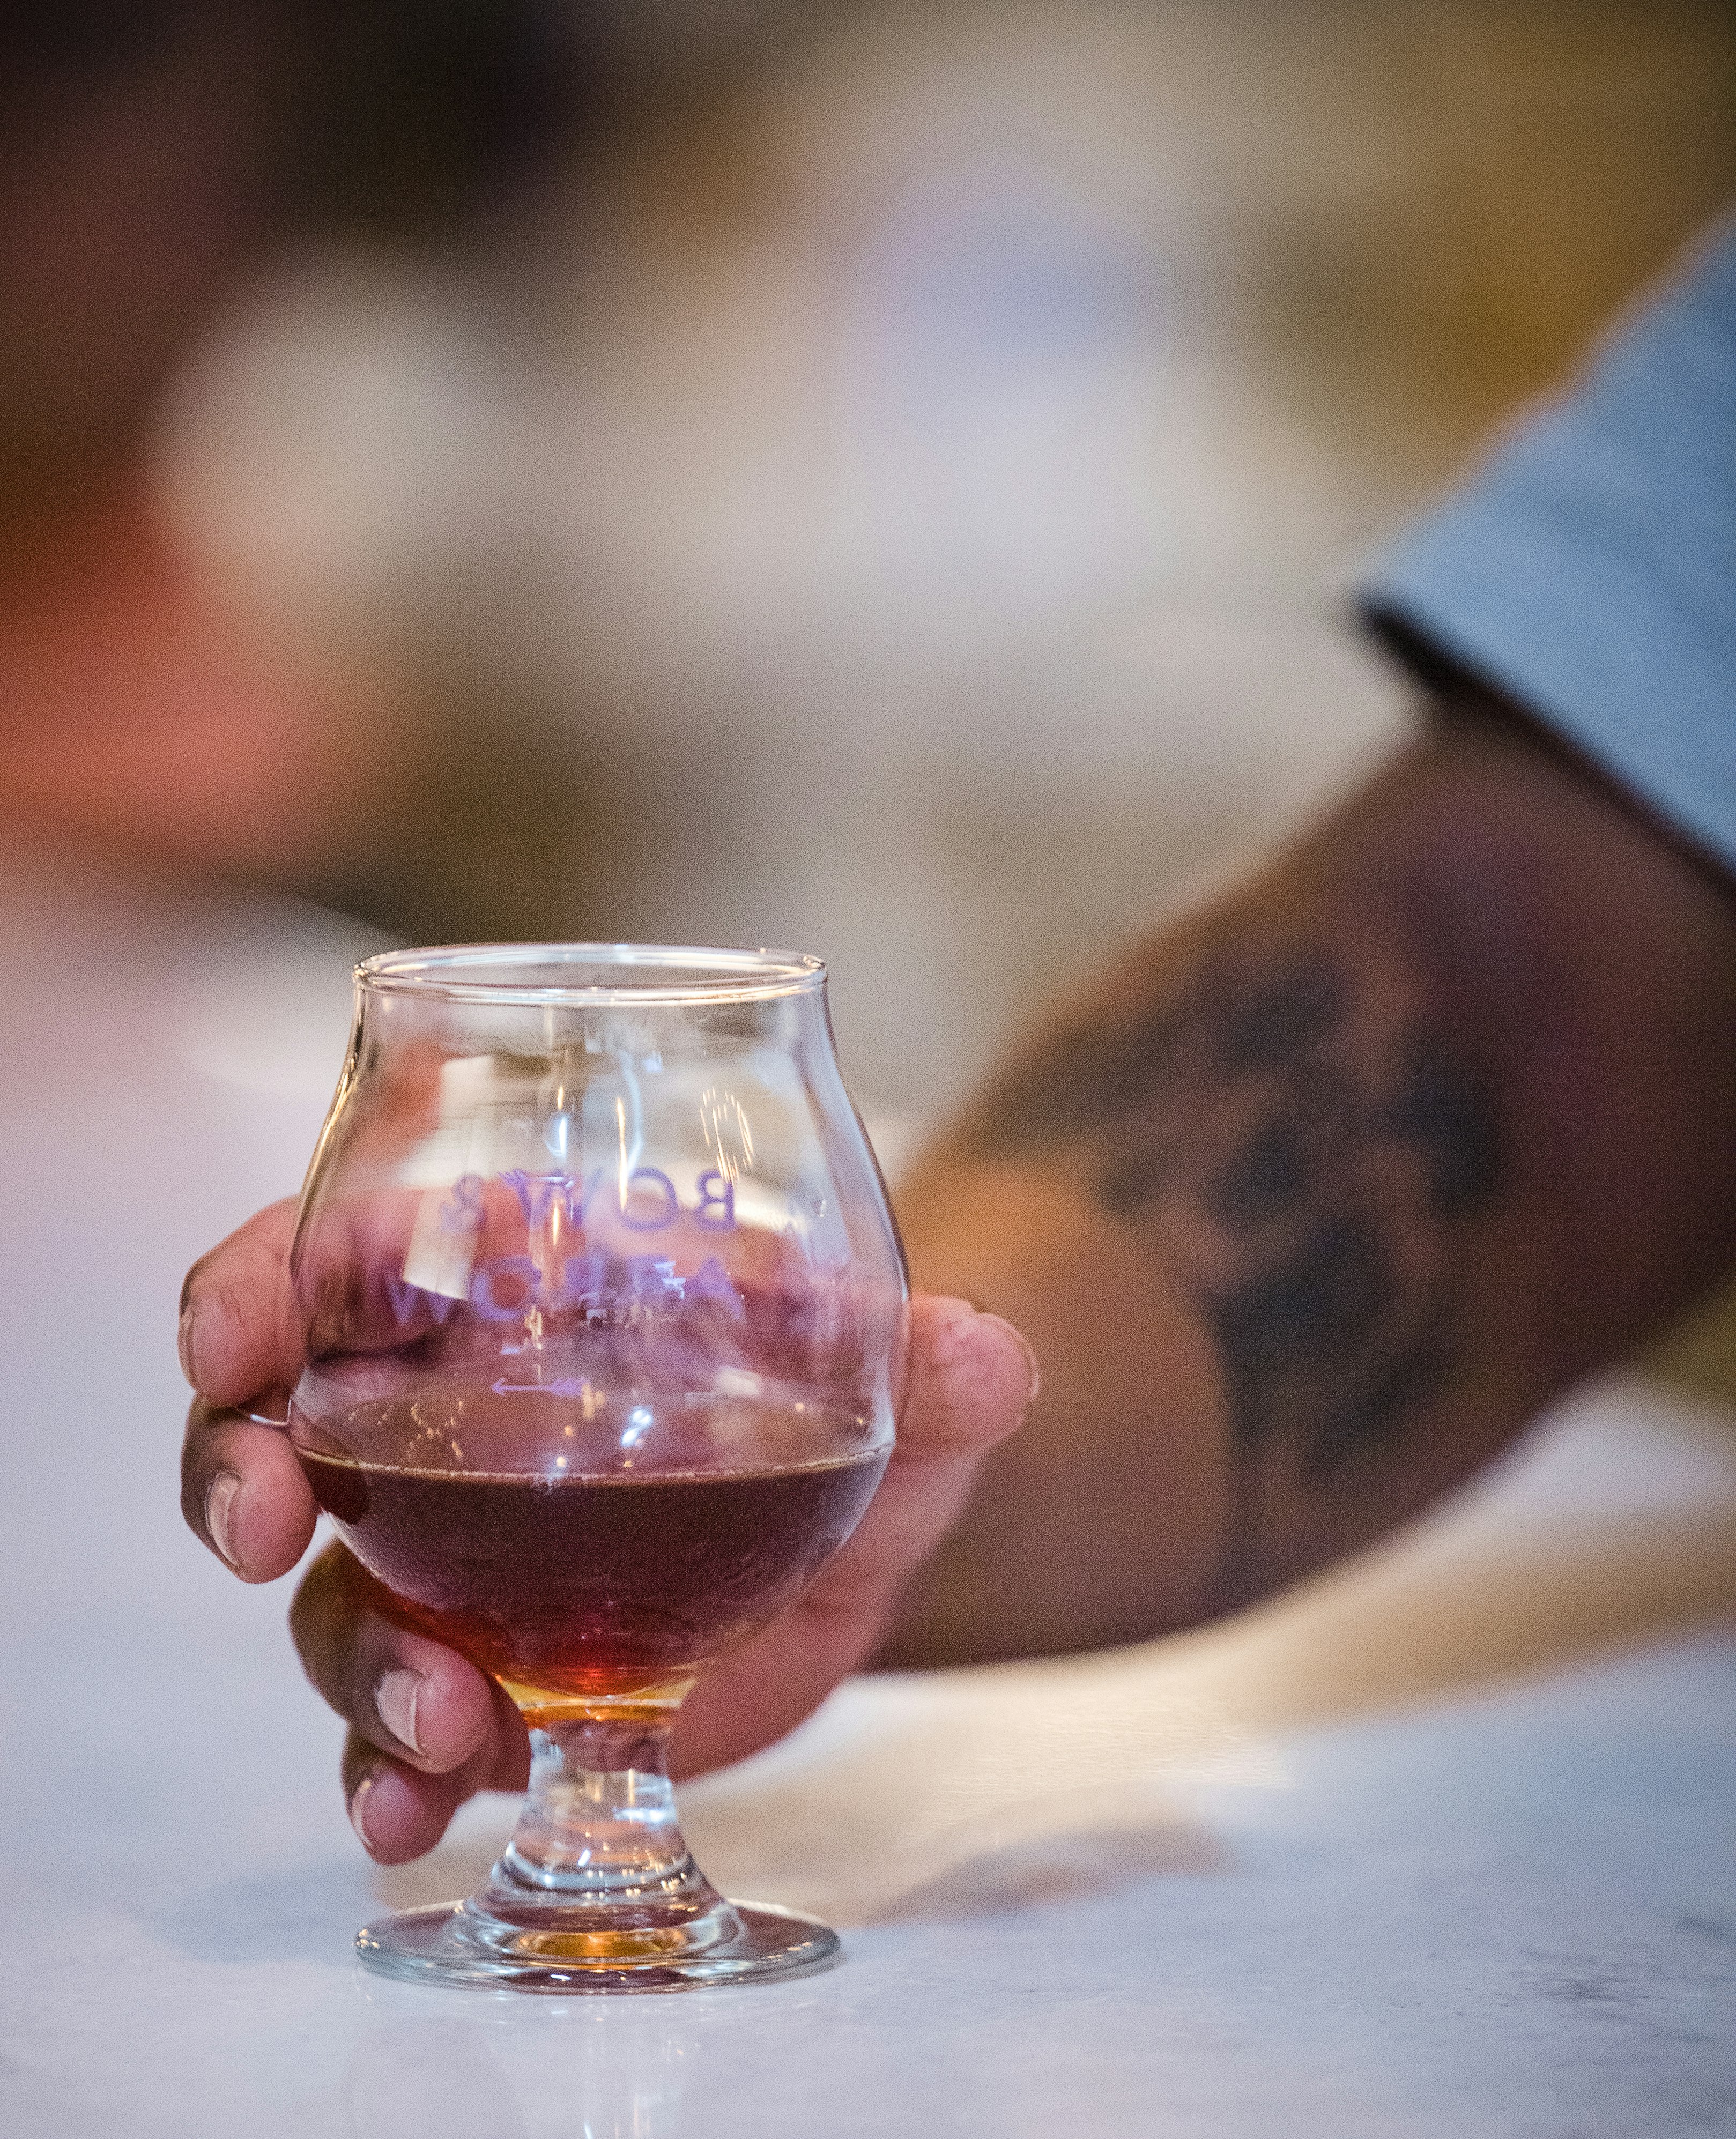 A customer holds a half-drunk beer at the Bow and Arrow Brewing Co. on July 14, 2021 in Albuquerque, New Mexico